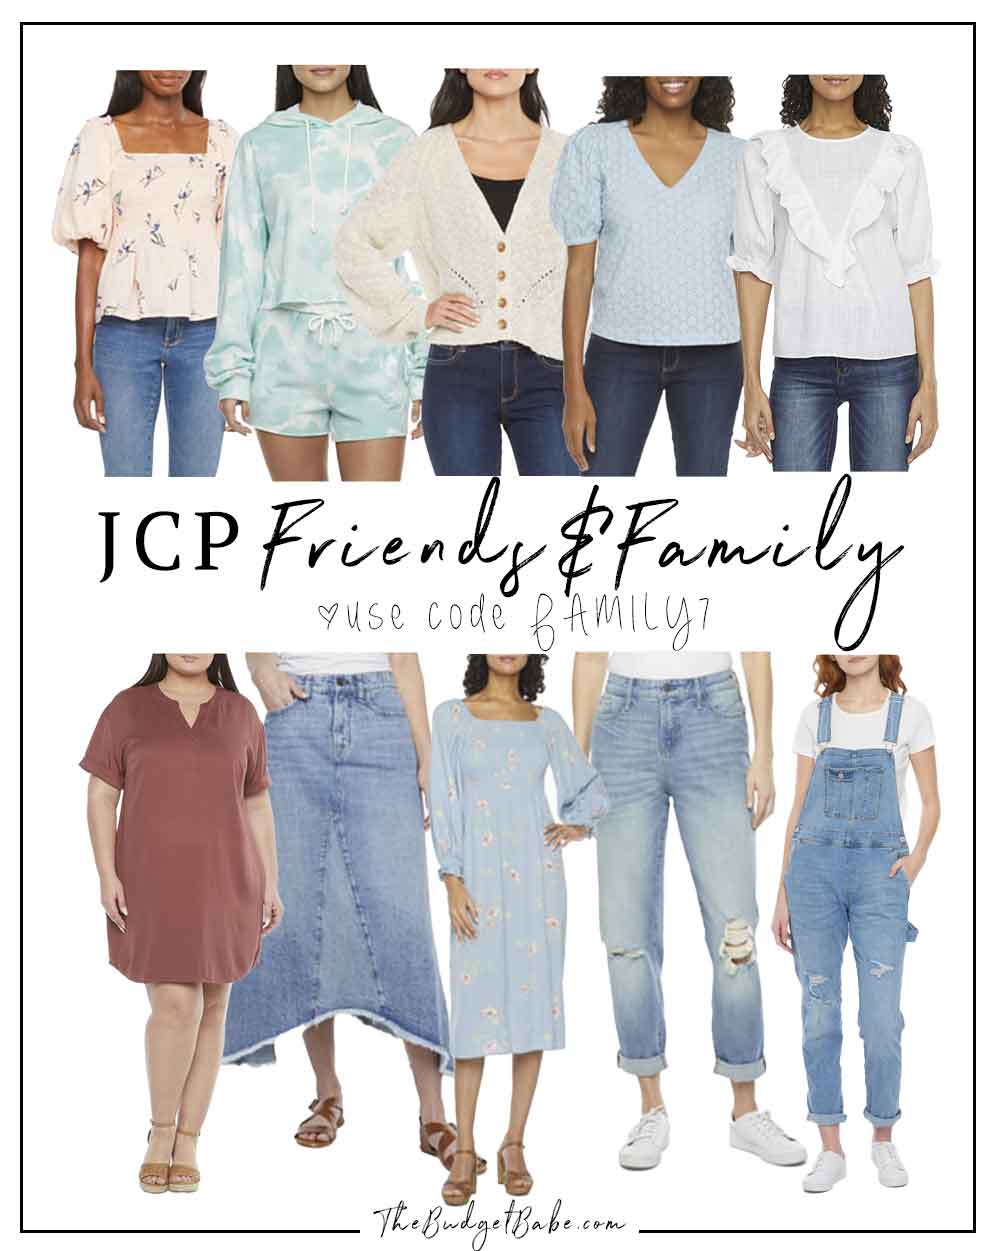 JCPenney Friends & Family sale!